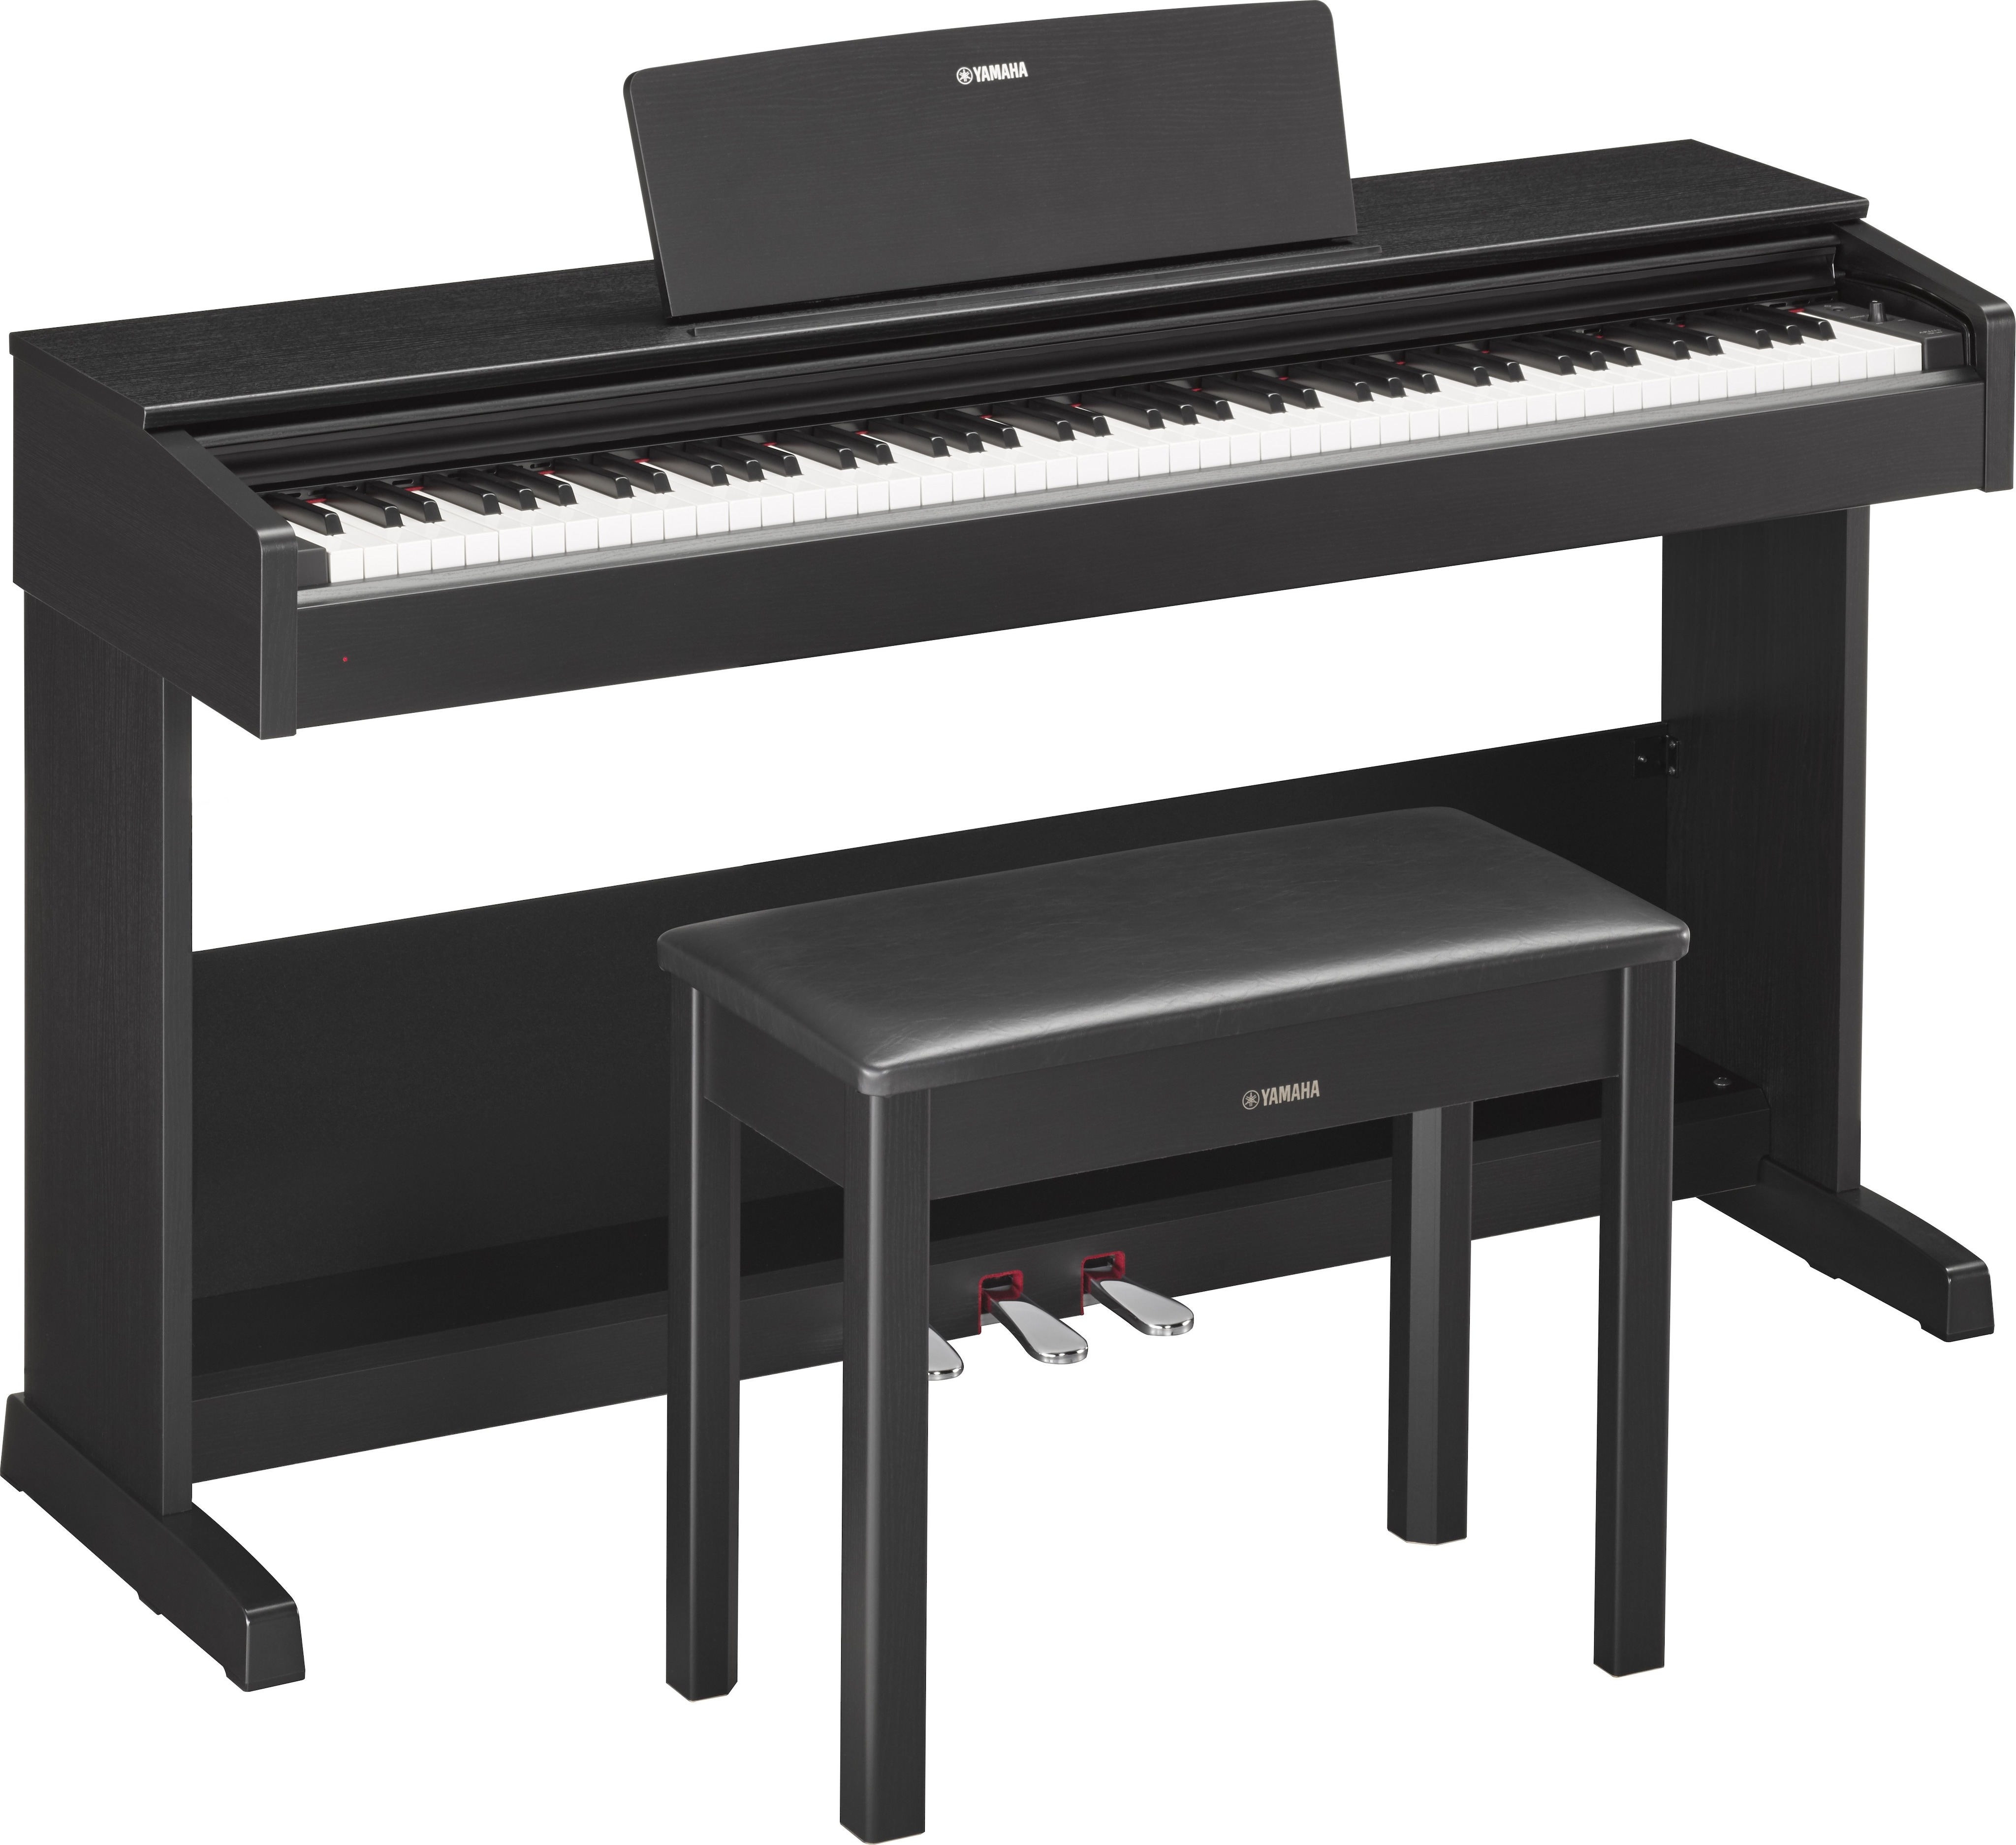 YDP-103 - Overview - ARIUS - Pianos - Musical Instruments 